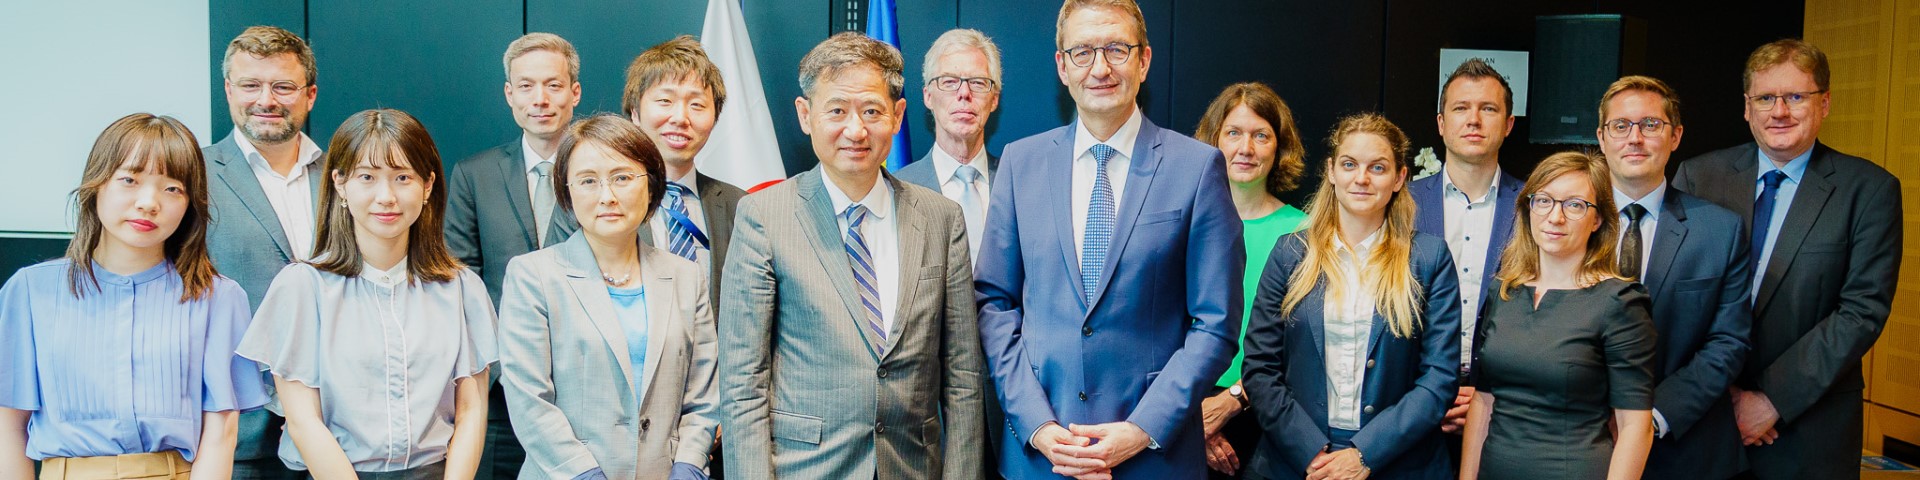 Government representatives from Germany and Japan at the German-Japanese Digital Dialogue.